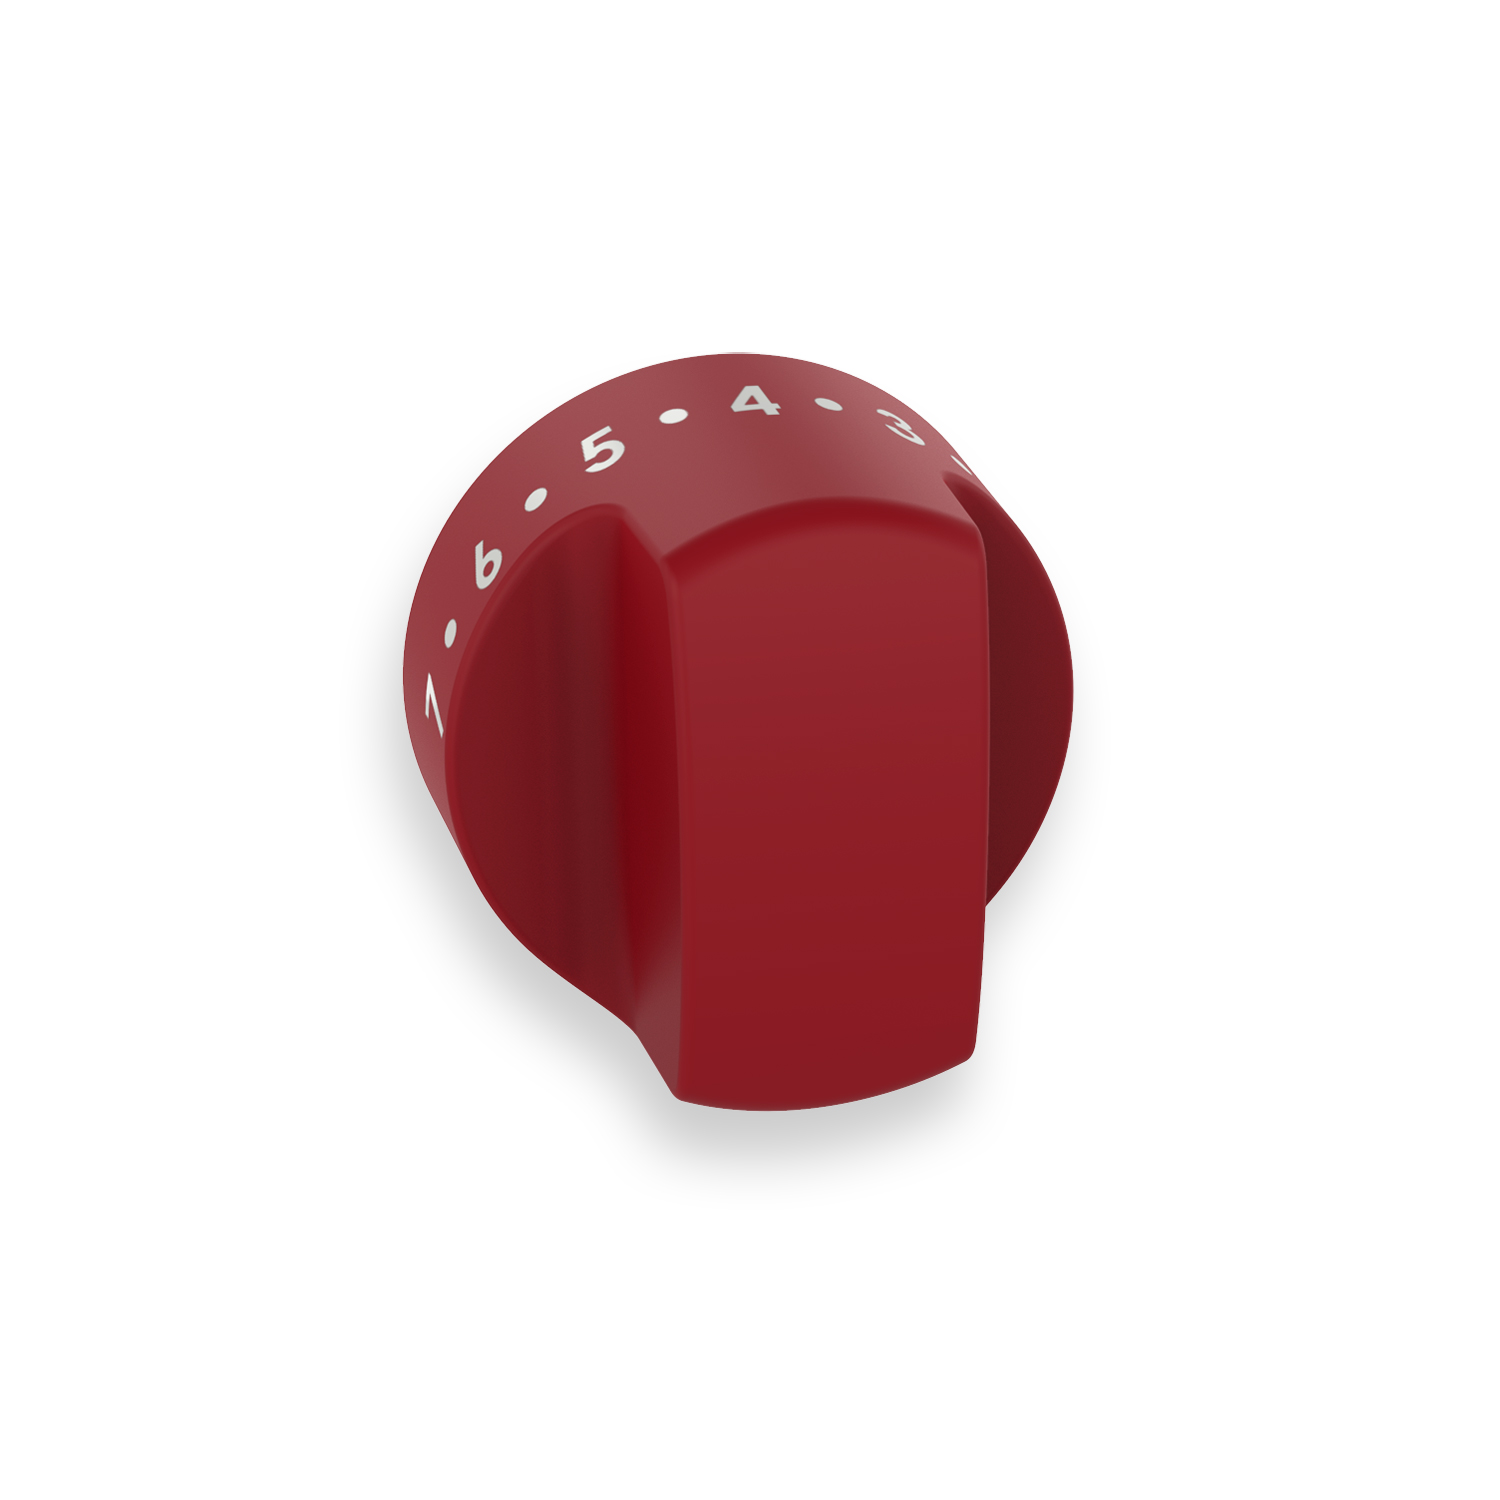 Two Slice Toaster Knob - Red